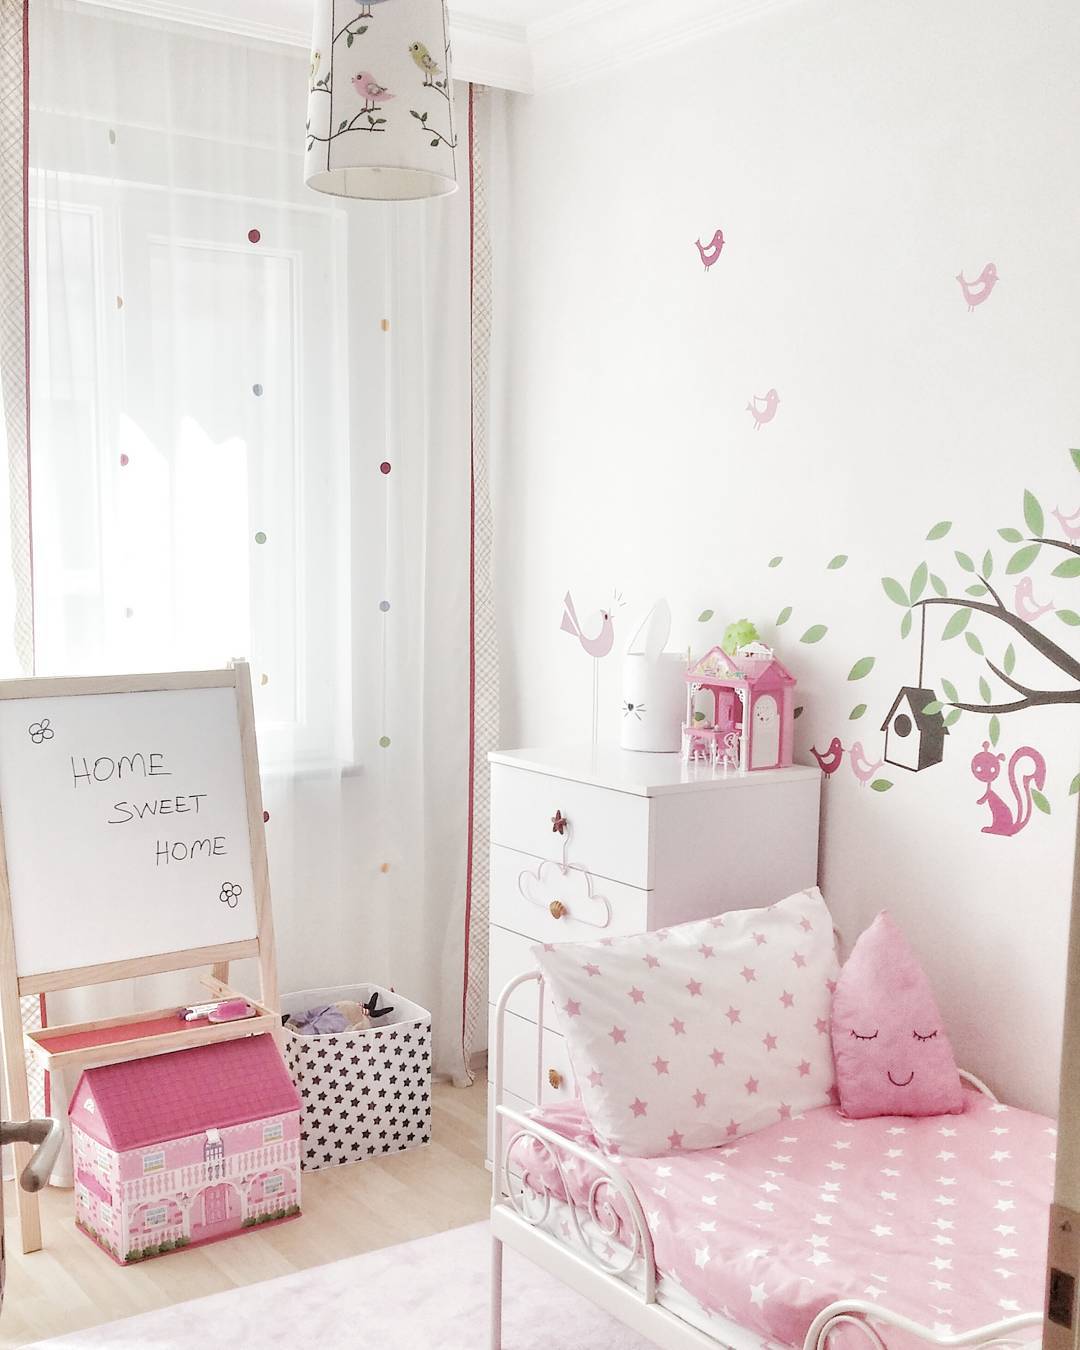 Place chalkboards, wall stickers and accessories to stimulate the child